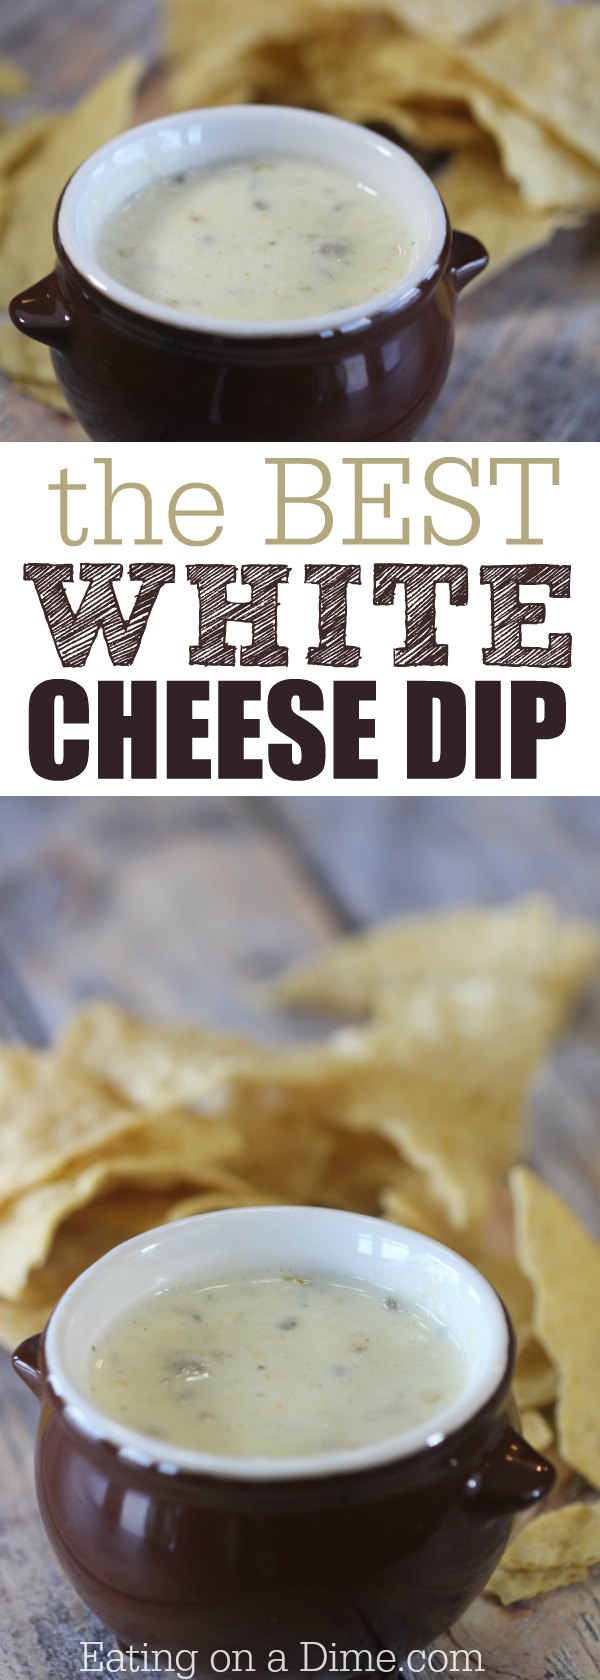 The Best Mexican White Cheese Dip Authentic Queso Dip Recipe,Micro Jobs That Pay Daily